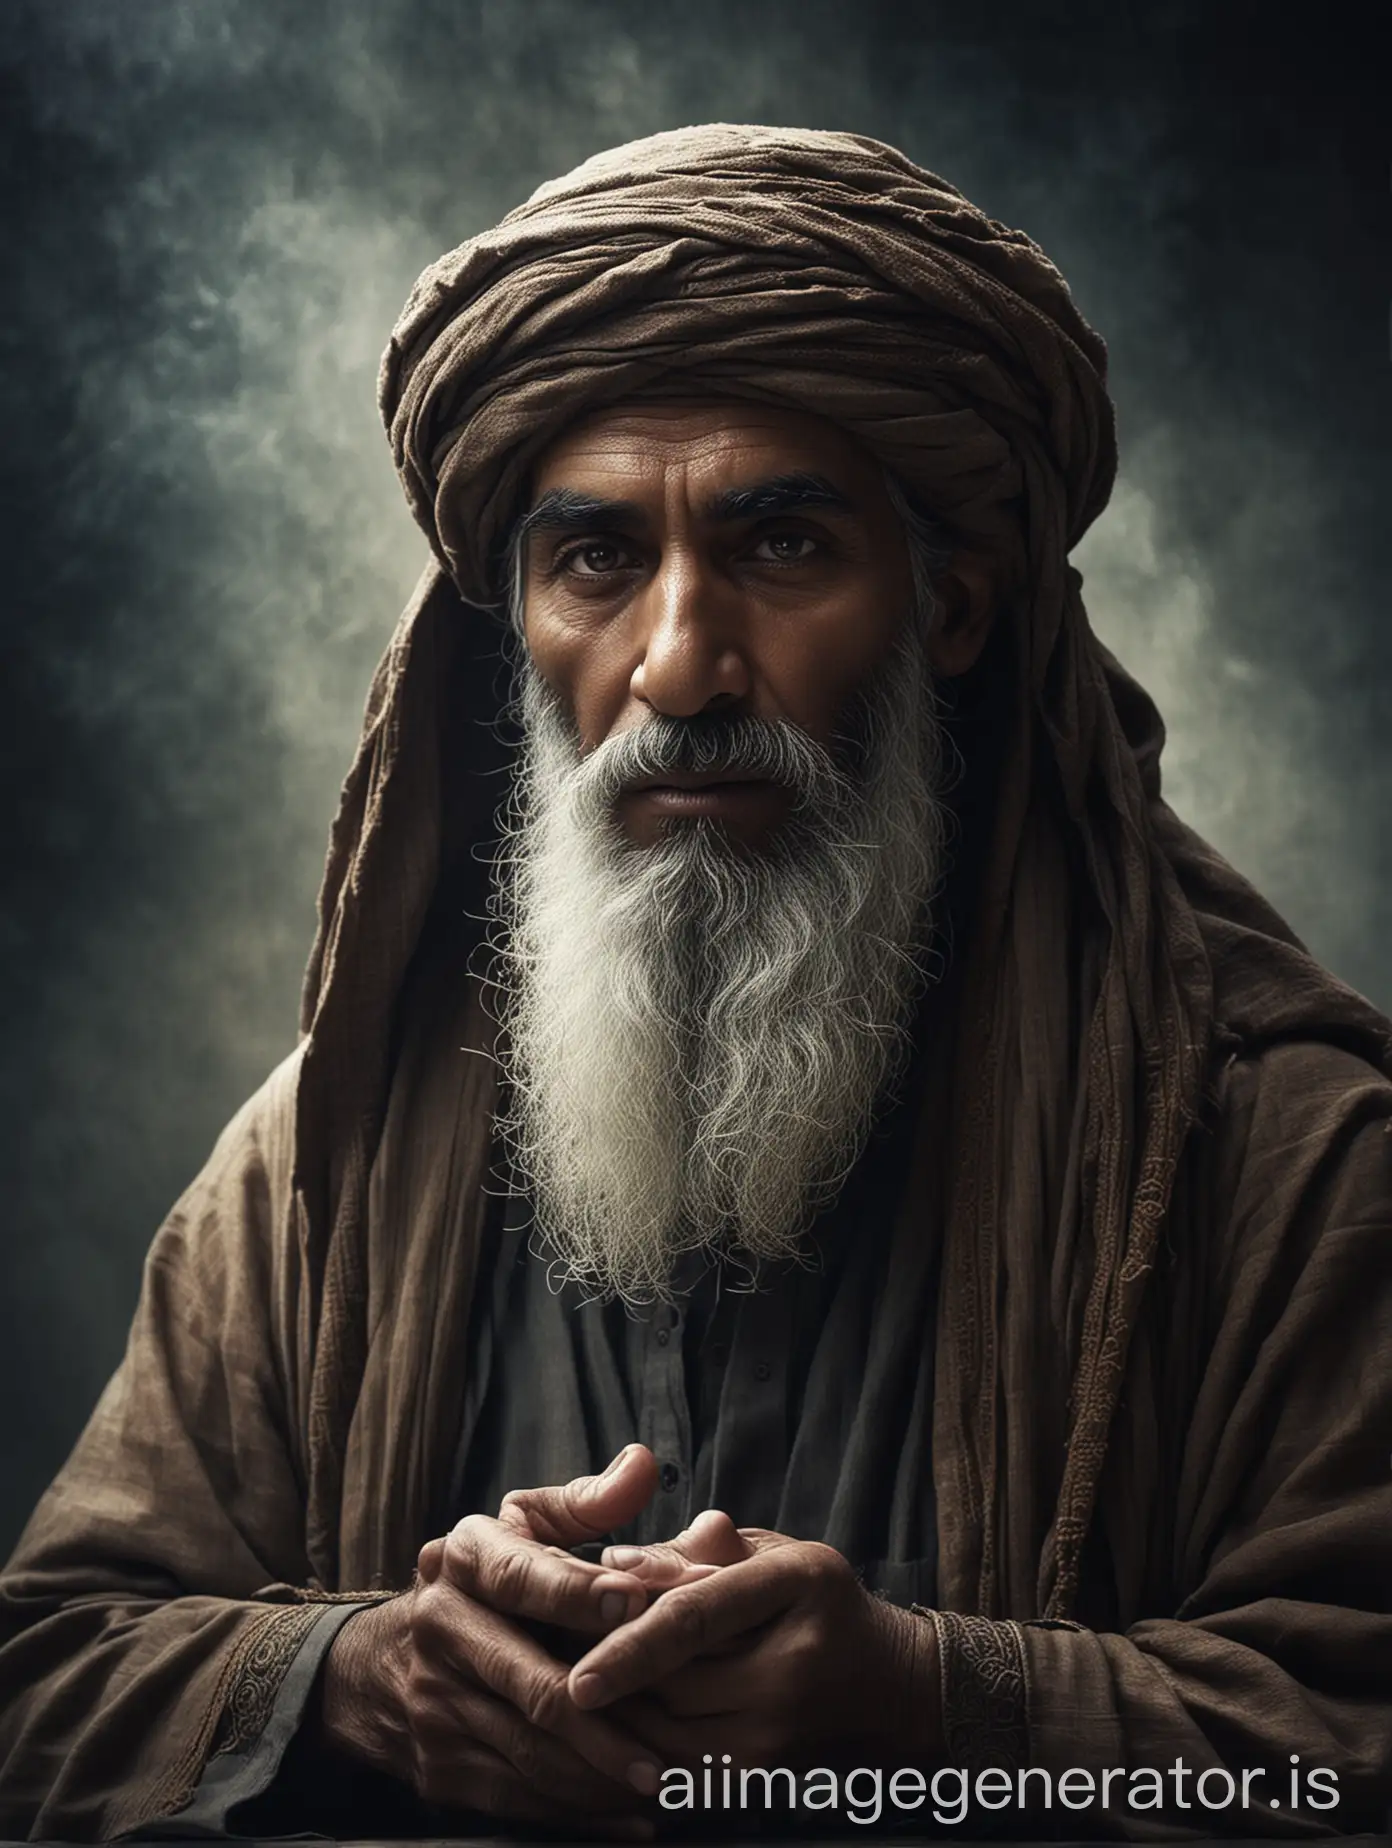 Create an image that portrays the mysterious stranger who offers invaluable advice to Salahuddin Ayyubi, emphasizing the enigmatic aura surrounding the encounter and the sense of wisdom and guidance emanating from the stranger."
